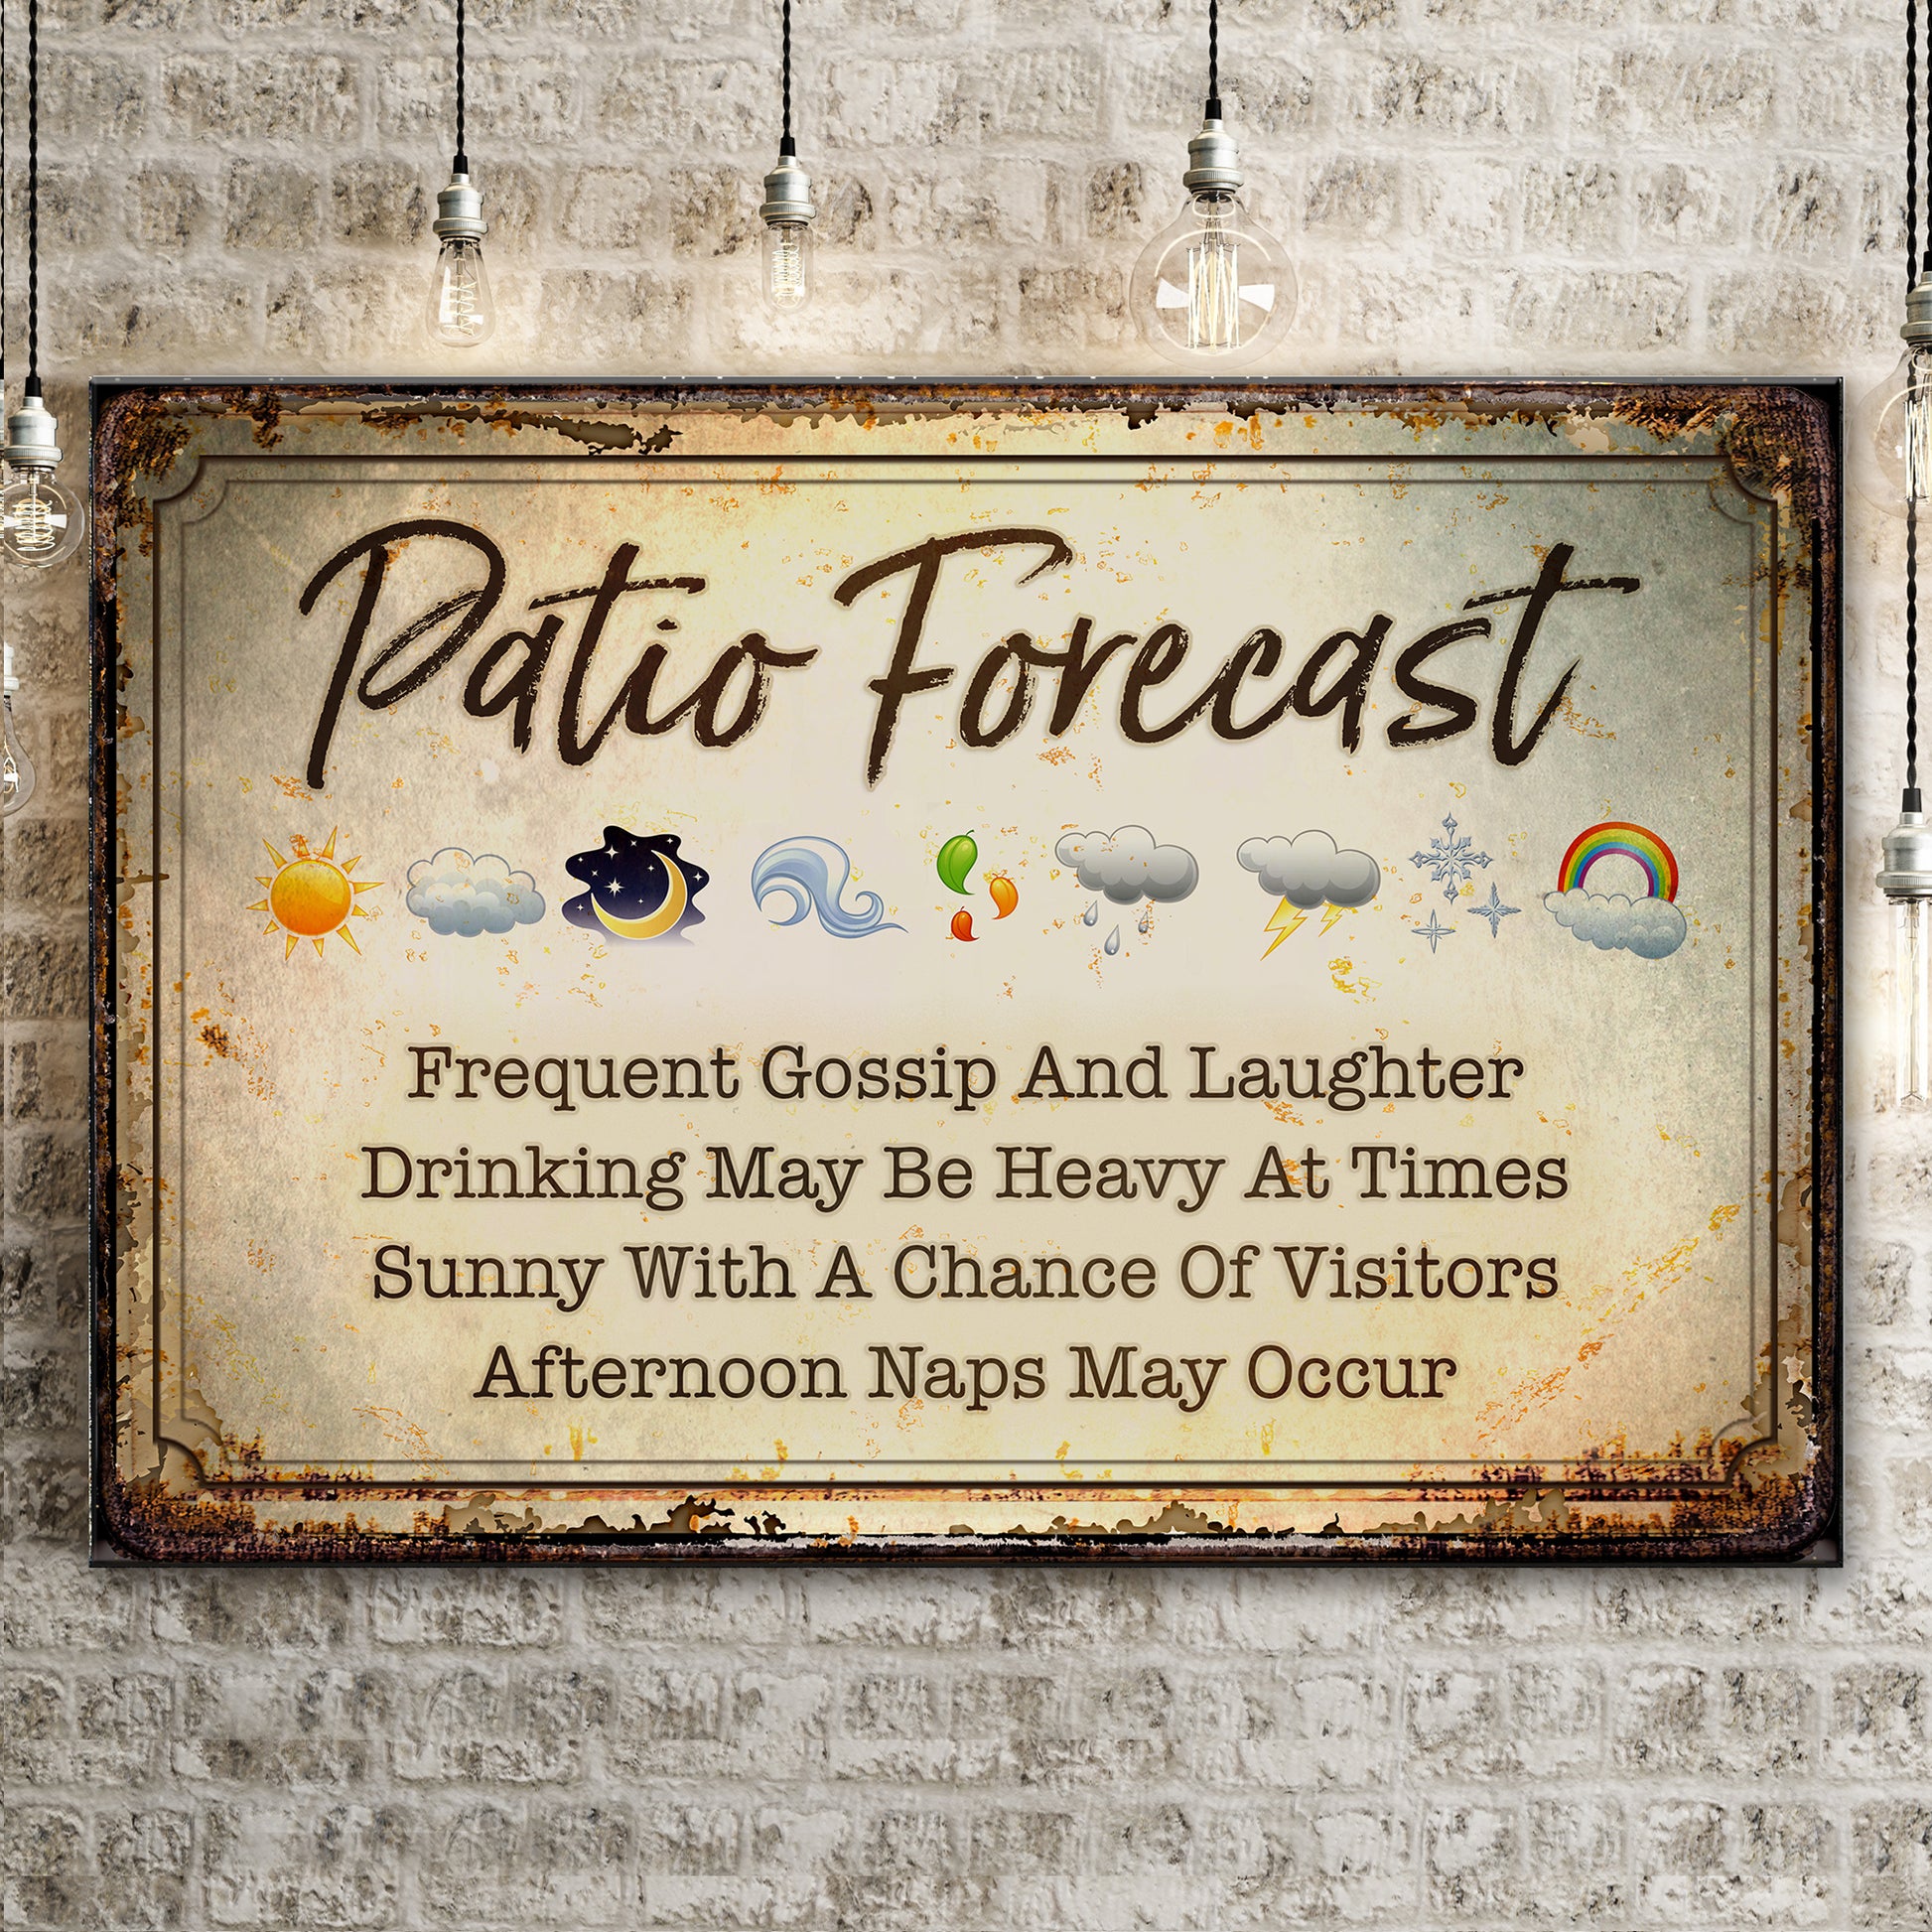 Patio Forecast Sign Style 1 - Image by Tailored Canvases